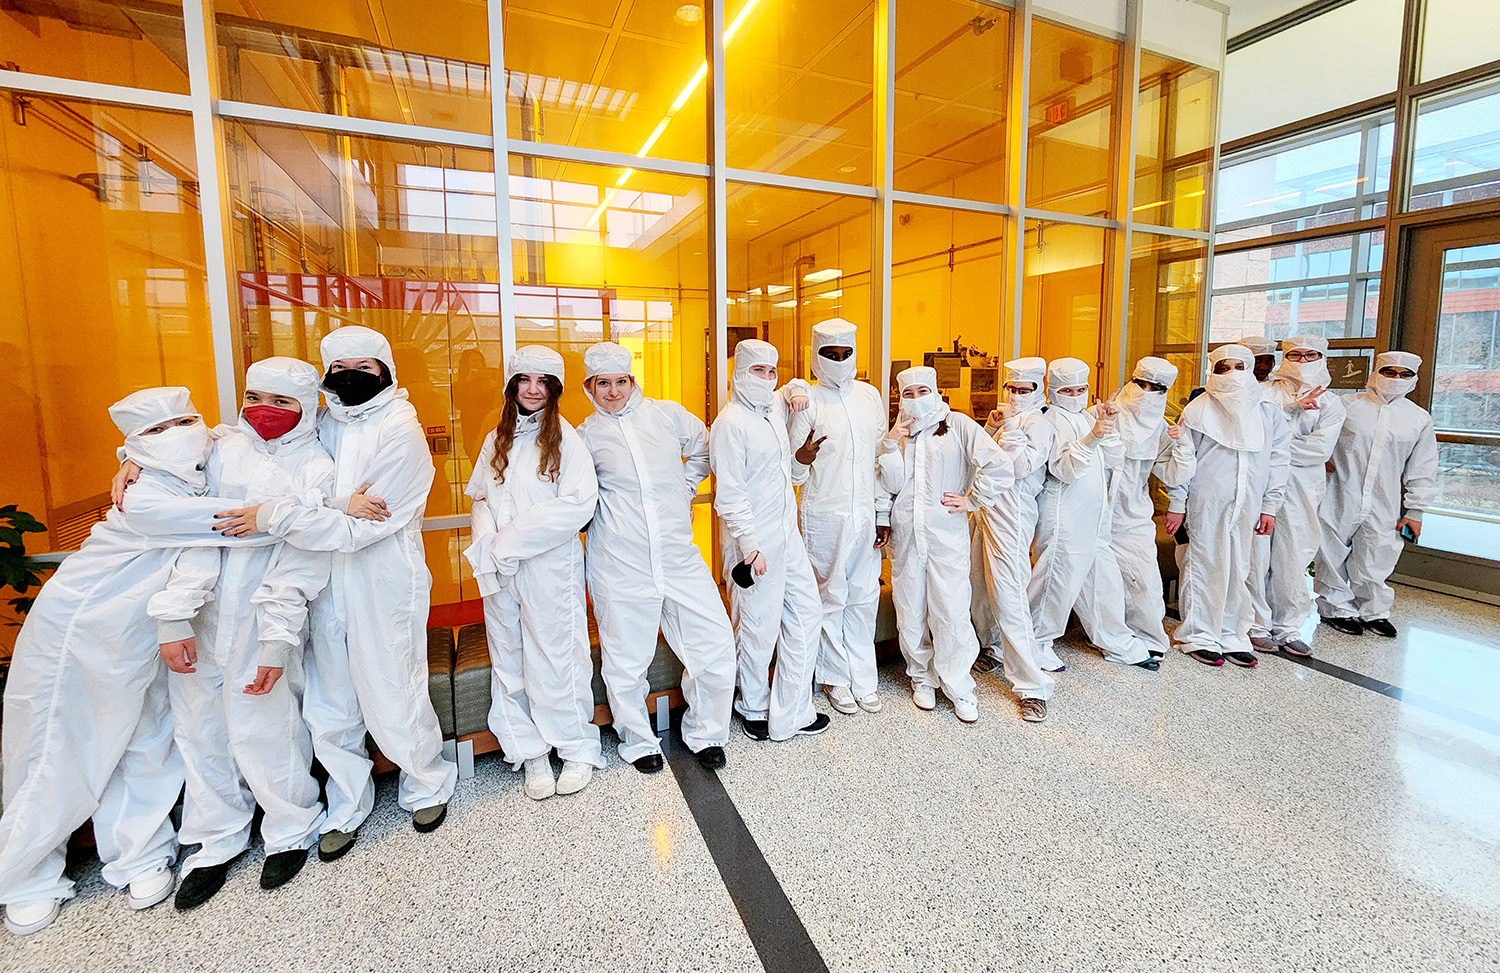 Students from Campus Middle School for Girls try on protective gear called "bunny suits" in front of the cleanrooms within the Nick Holonyak Micro and Nanotechnology Laboratory.